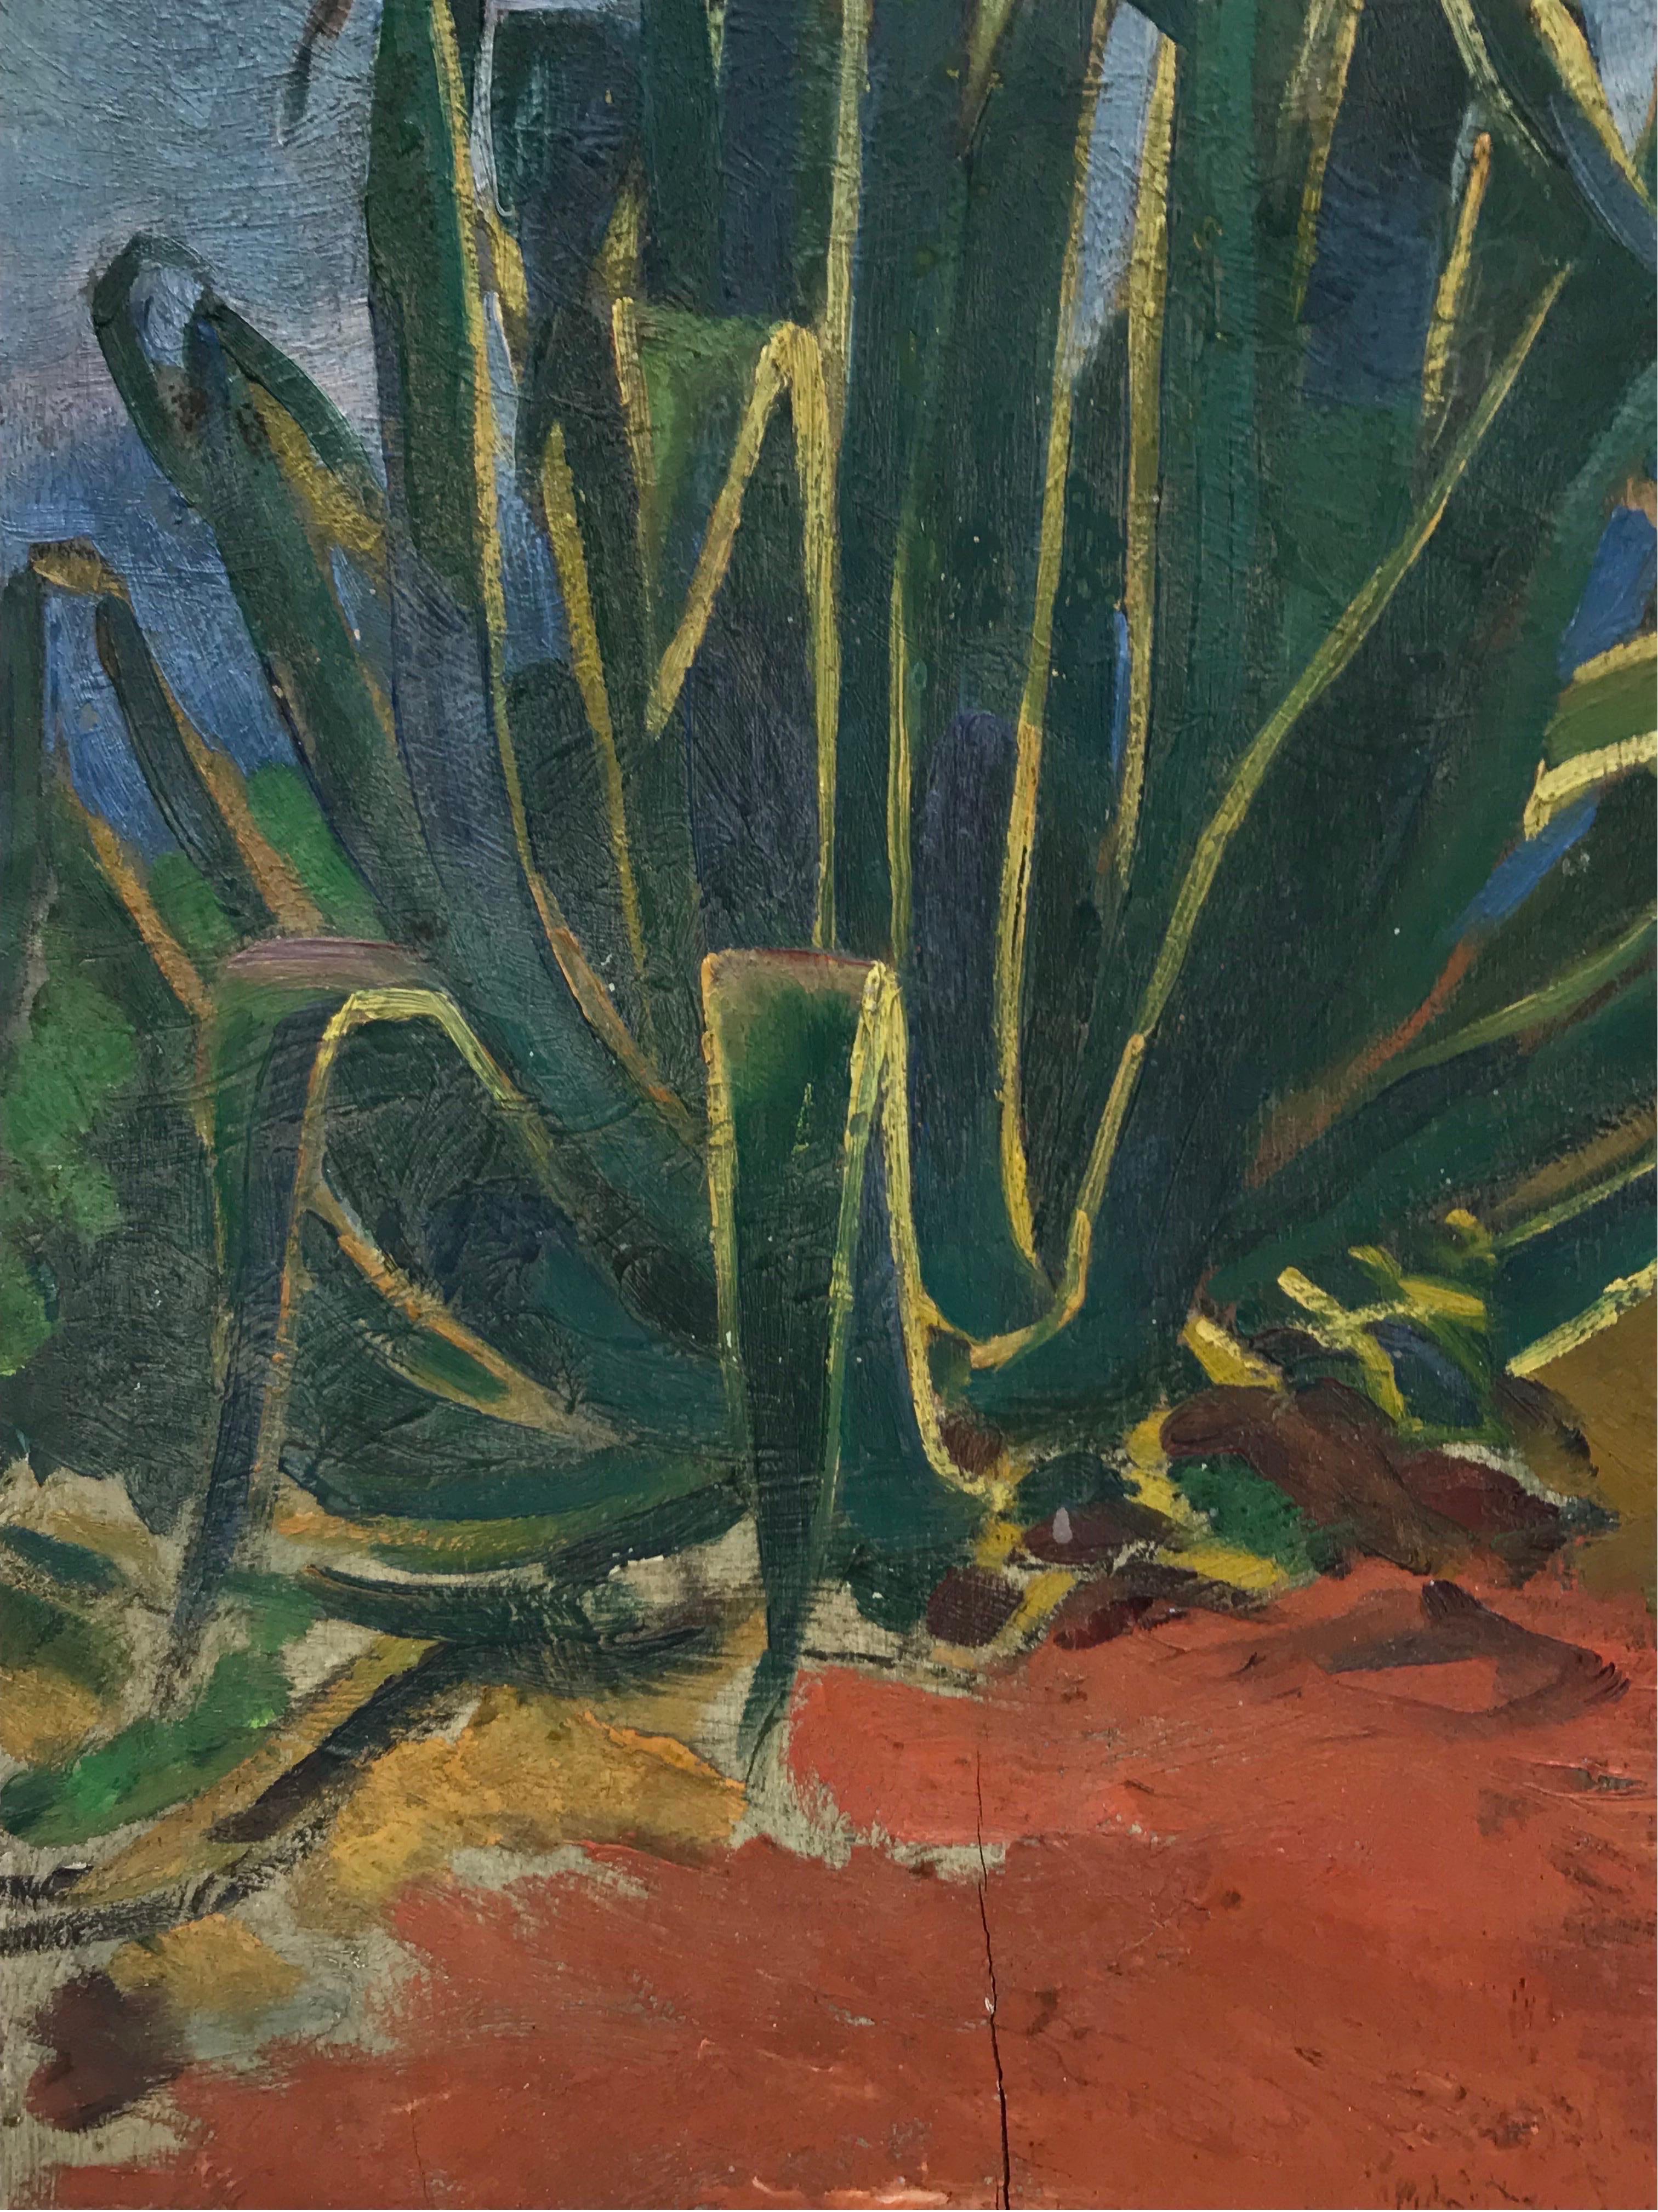 Artist/ School: Suzanne Crochet (French c. 1930), female French Impressionist artist

Title: Aloe Vera plant growing in the wilderness

Medium: oil on board, unframed 

board: 13 x 9.5 inches

Provenance: private collection, France

Condition: The